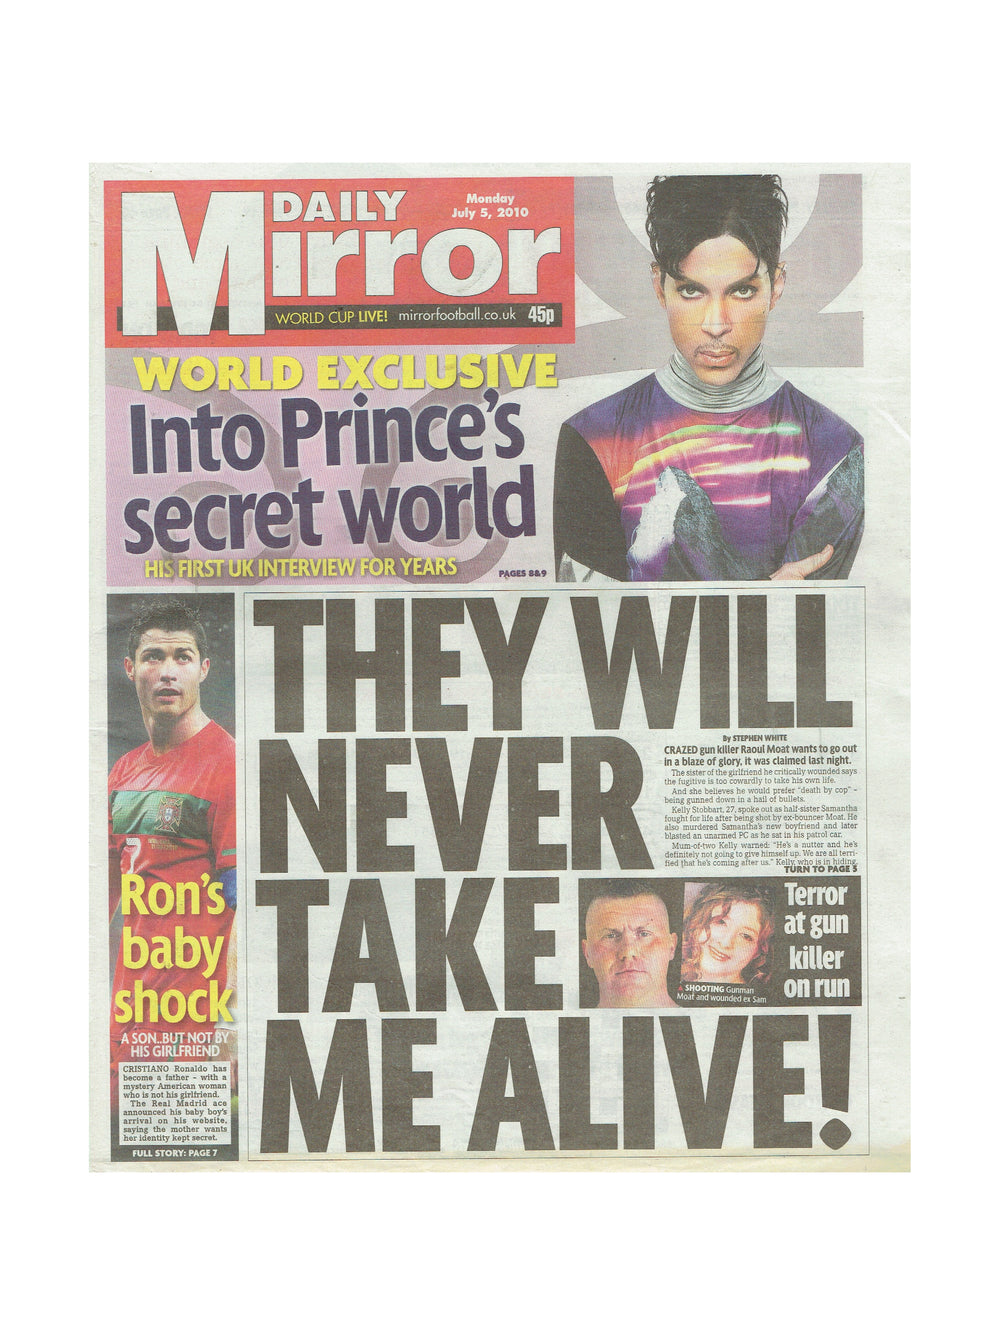 Prince Daily Mirror Newspaper Monday July 5th 2010 Cover Insert & 2 Pages